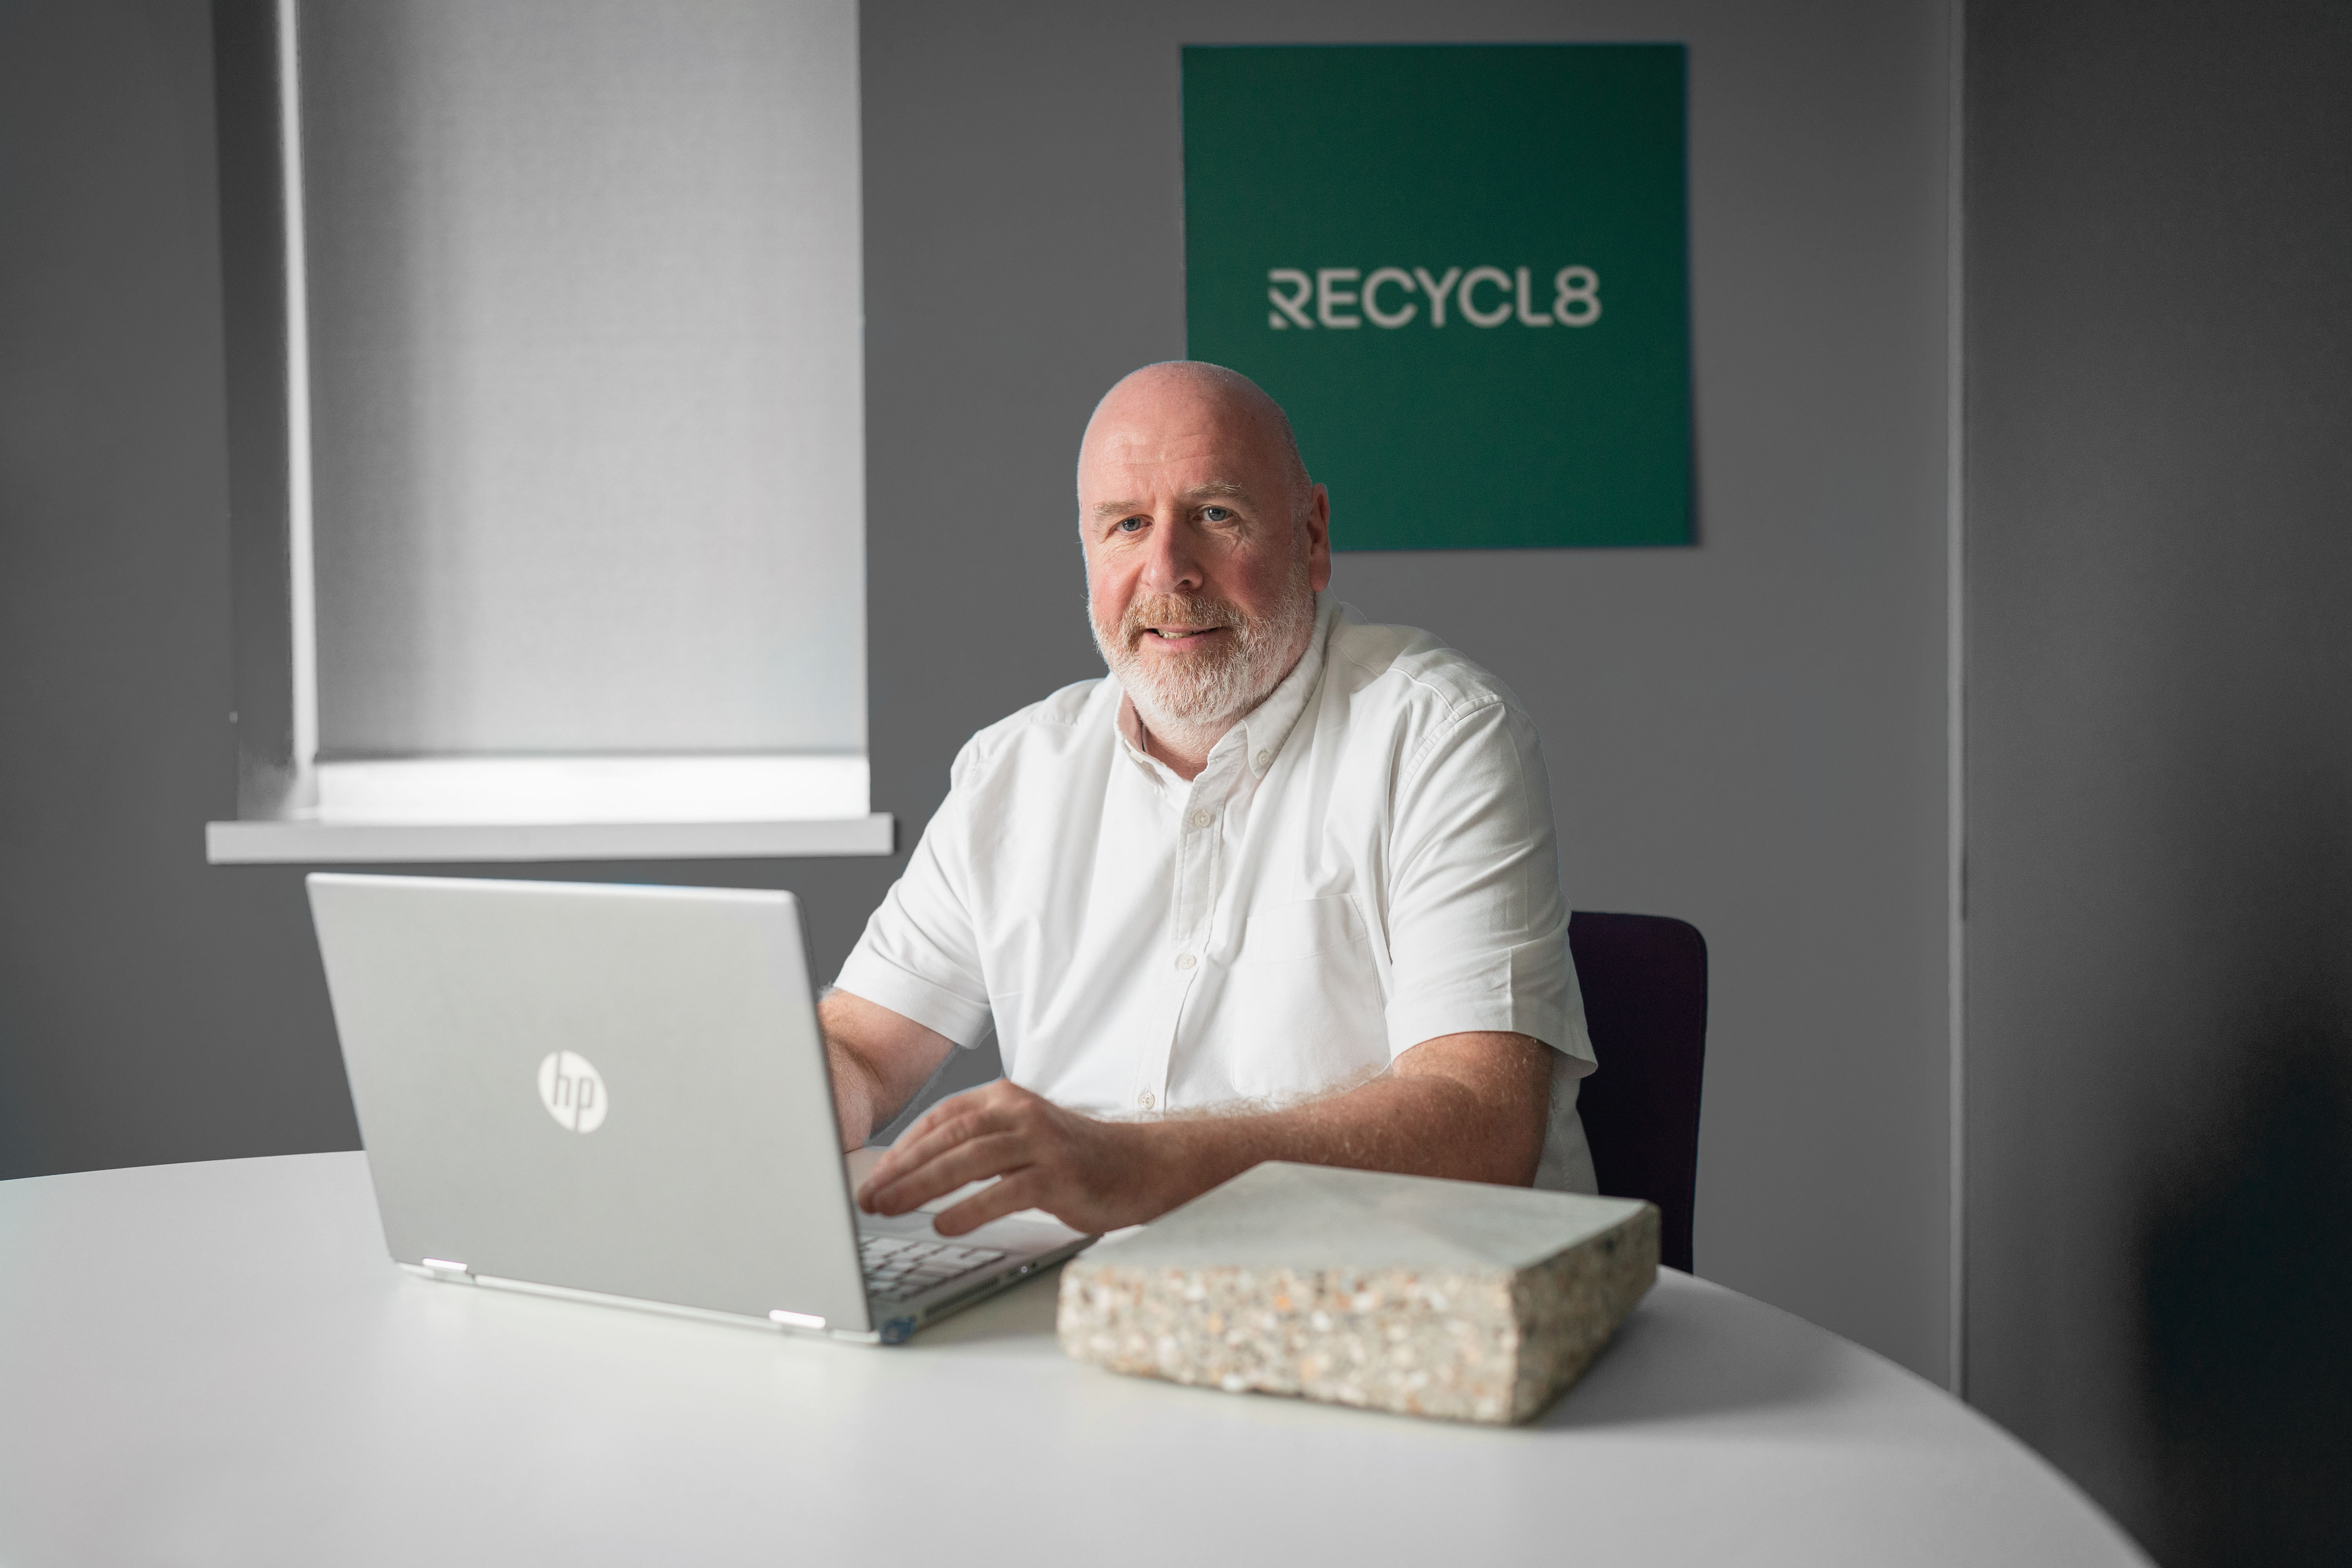 North-east environmental tech firm Recycl8 targets expansion into new markets